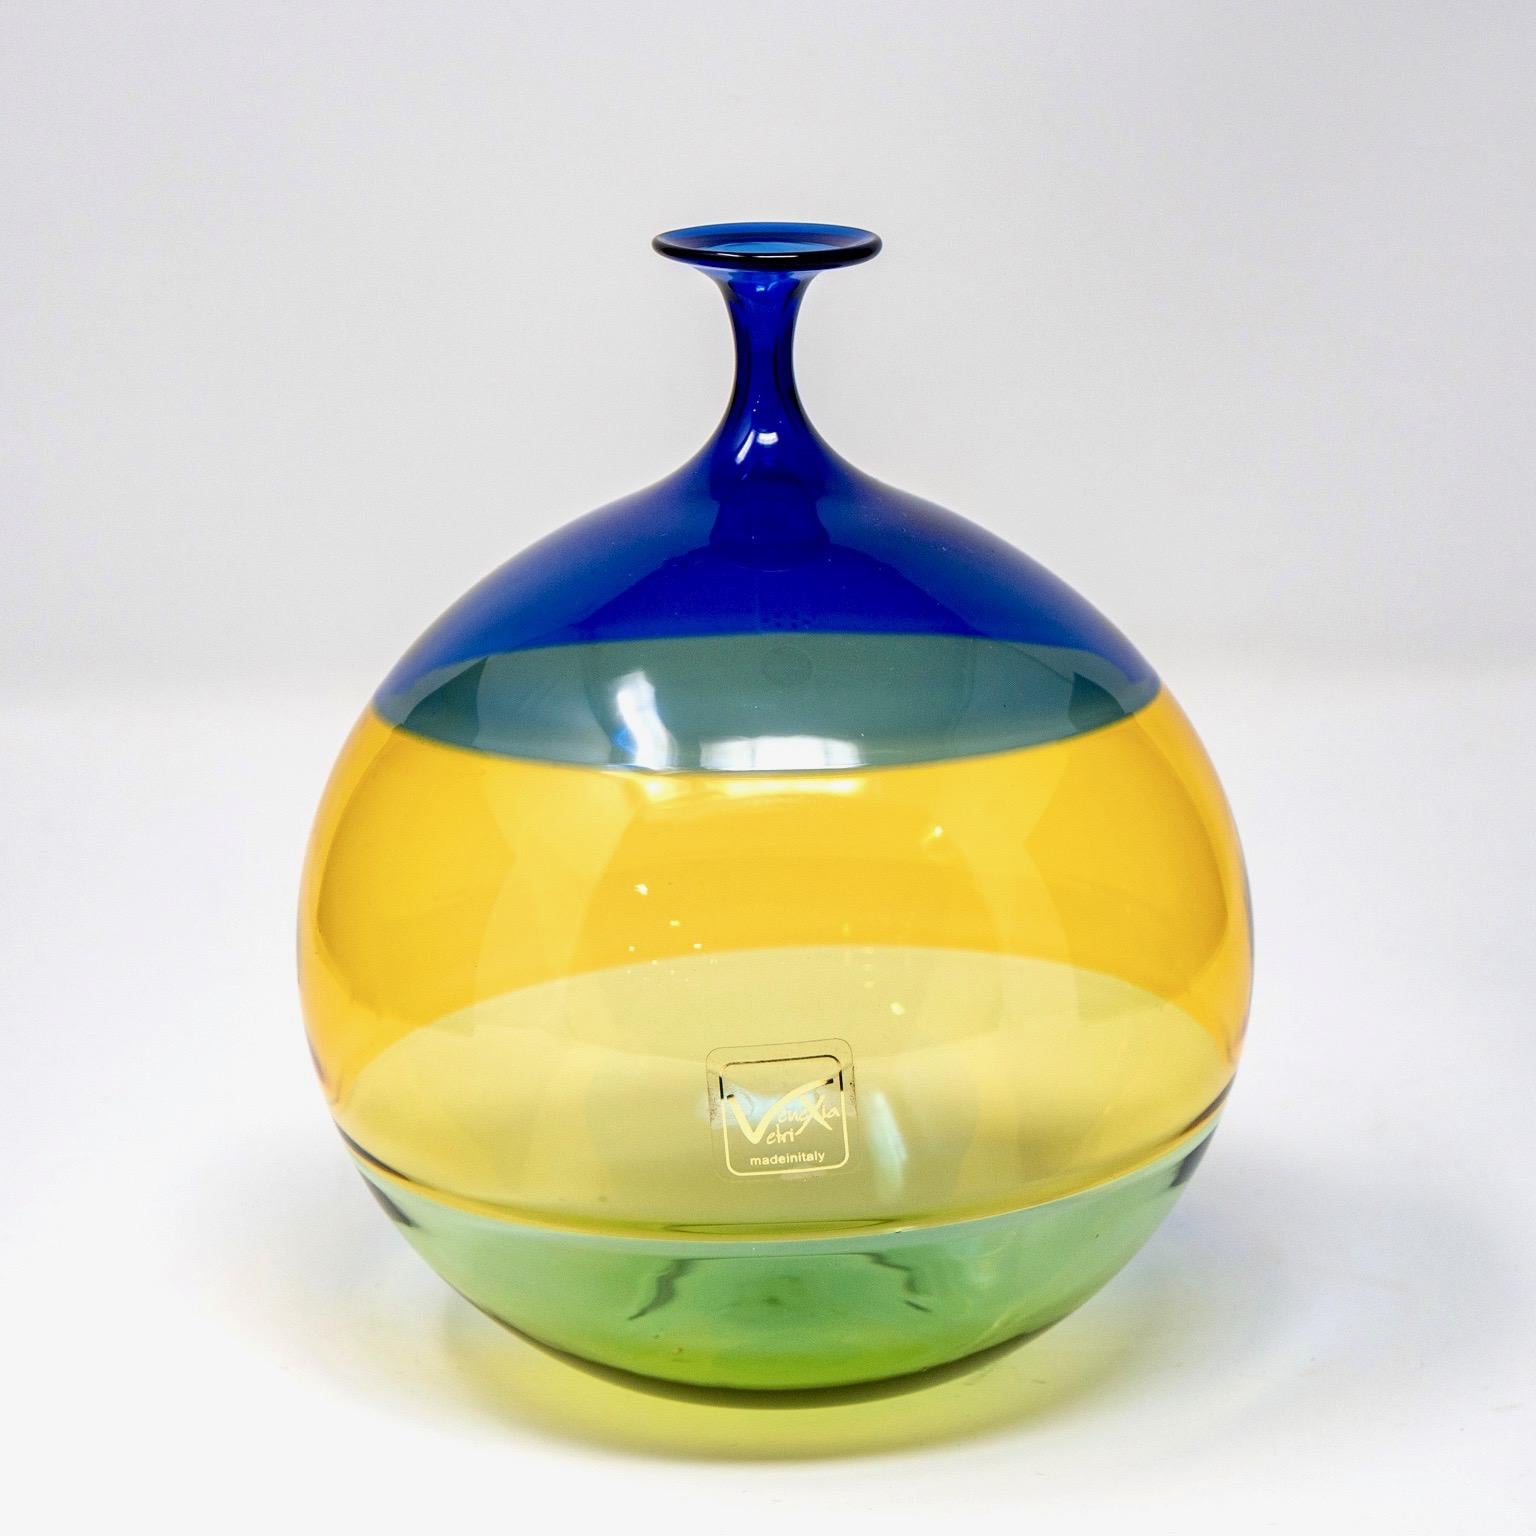 Medium sized globe shaped Murano glass vase signed by Vinciprova features a narrow neck and color block body with deep blue, yellow and green, circa 1980s. Original label affixed. Excellent vintage condition with no flaws found.